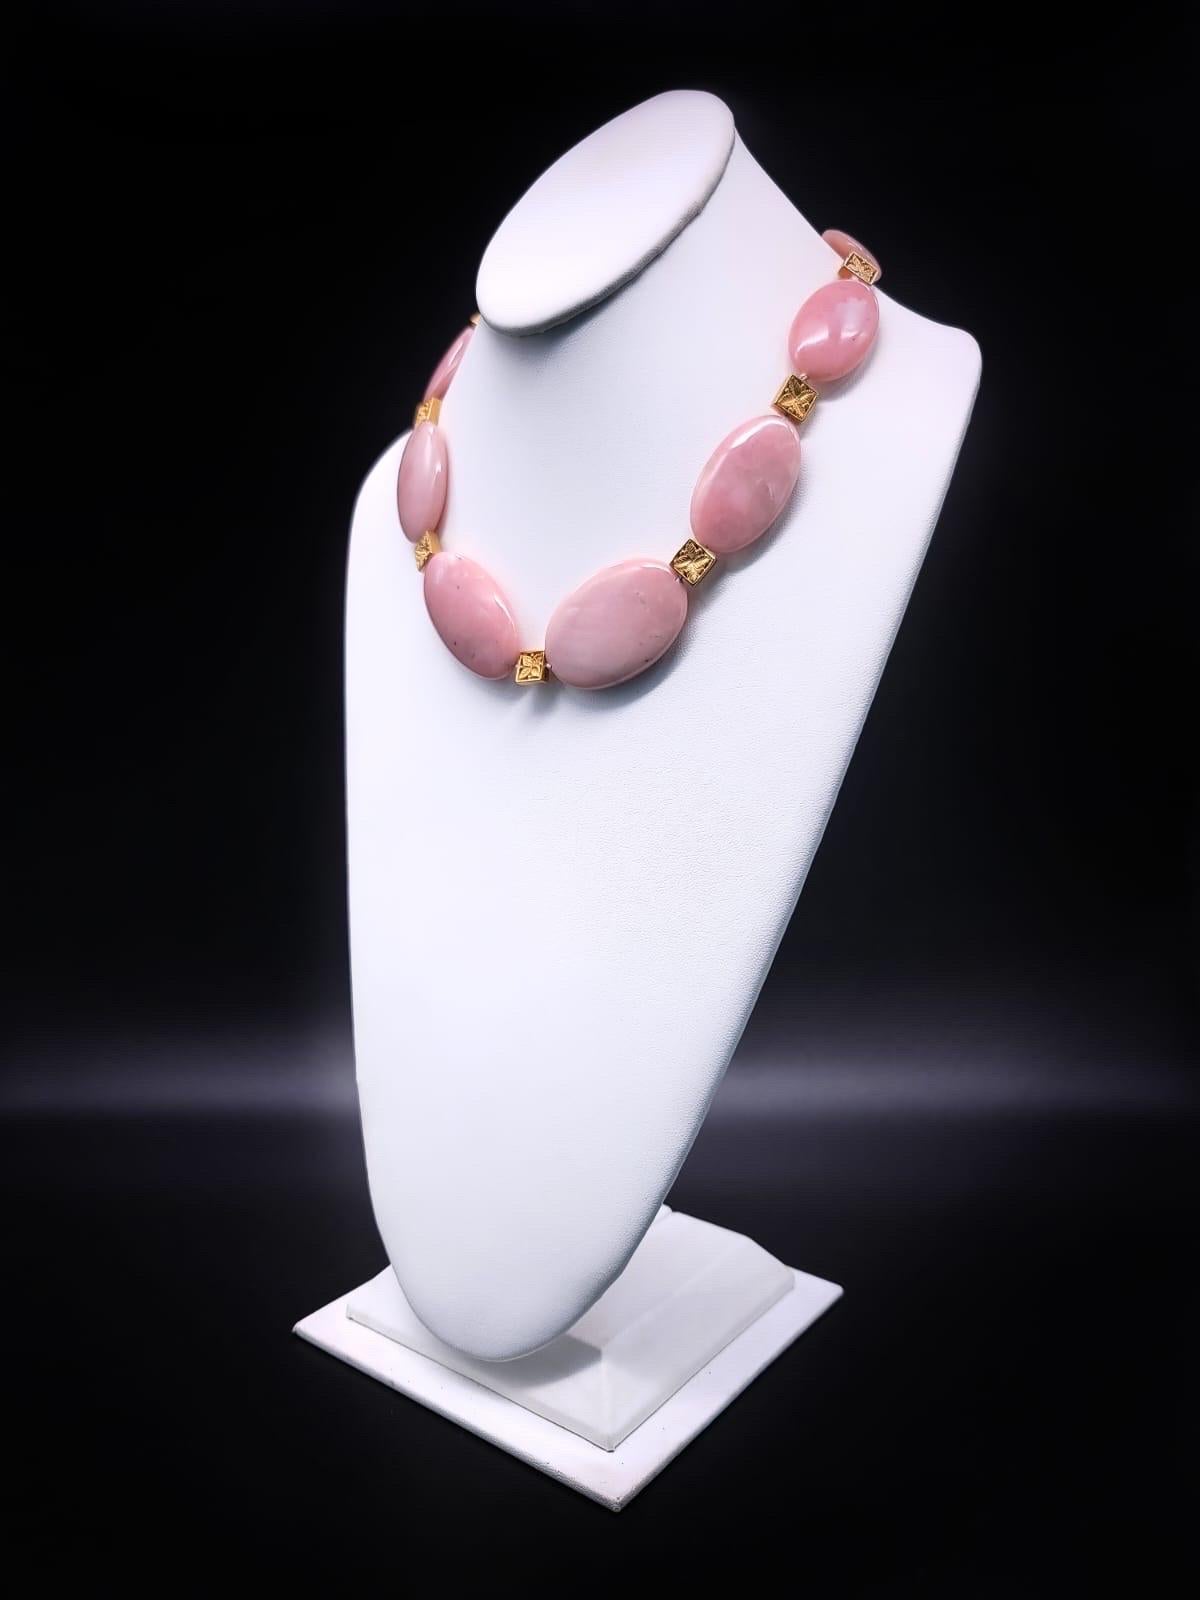 One-of-a-Kind

Indulge in the breathtaking allure of a truly one-of-a-kind accessory with our polished oval pink Peruvian opal necklace. Each opal bead boasts a captivating blush hue, reminiscent of the enchanting landscapes of the Andes. This